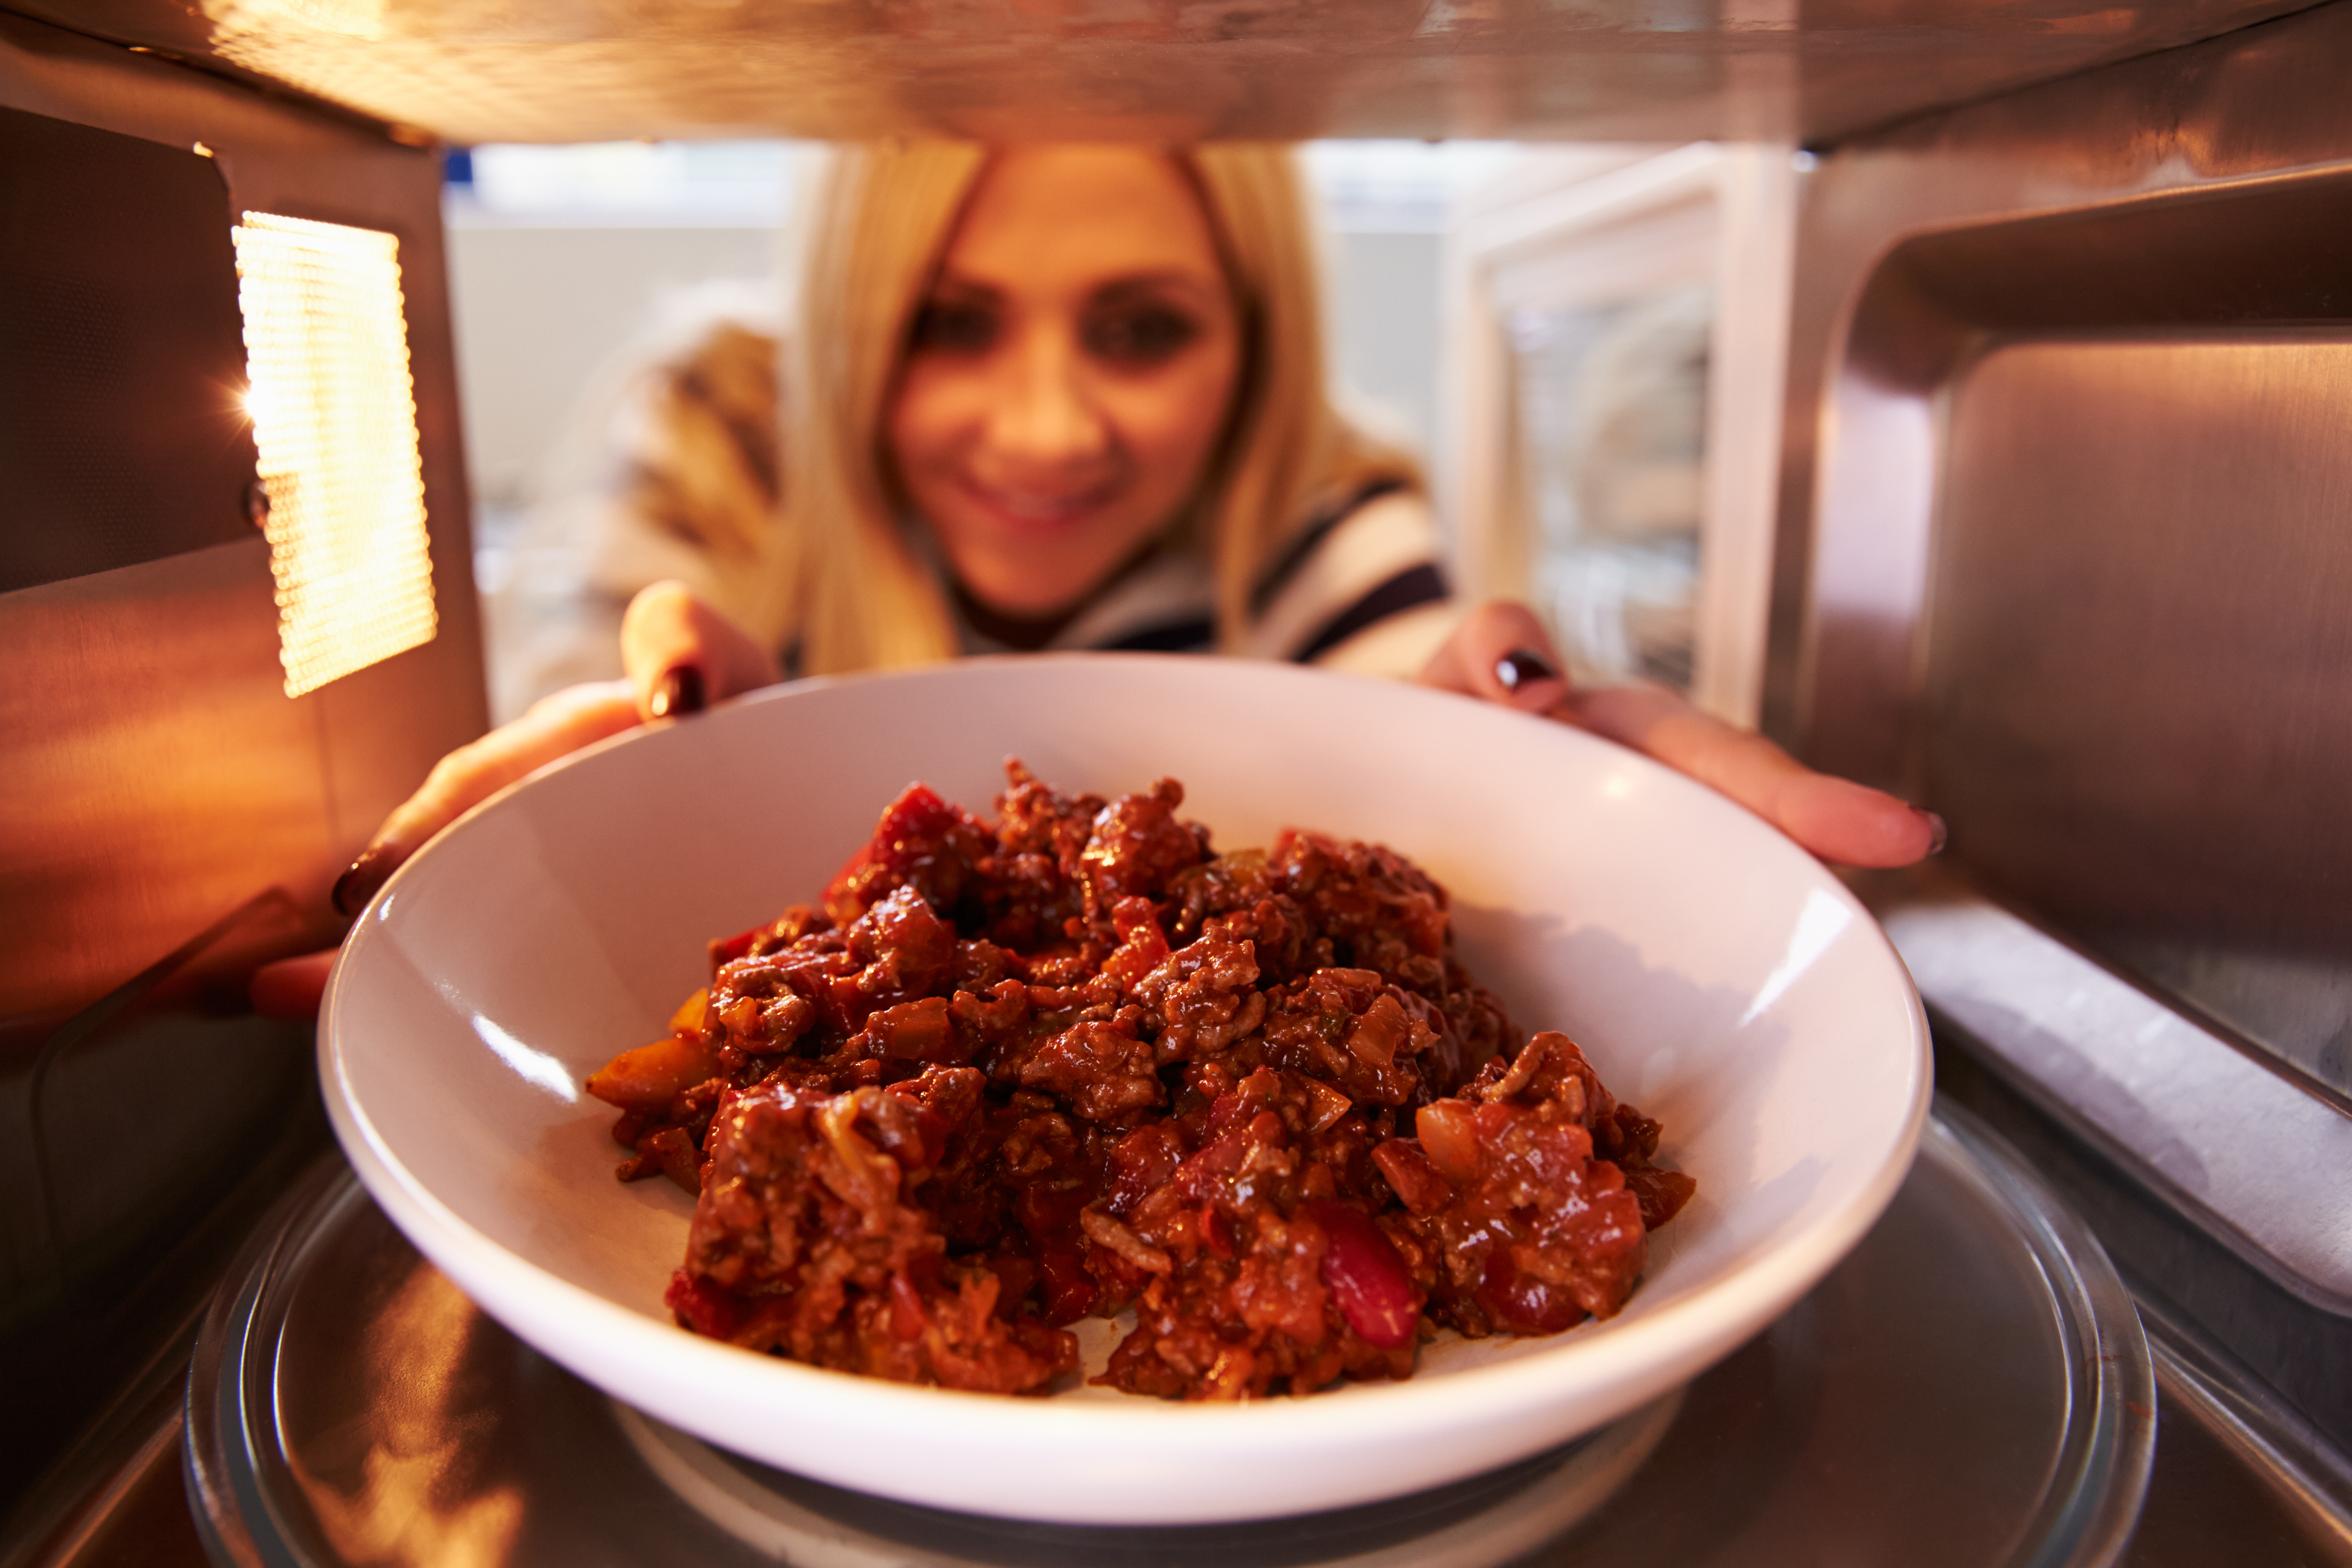 A woman place a white bowl filled with meat into a microwave.